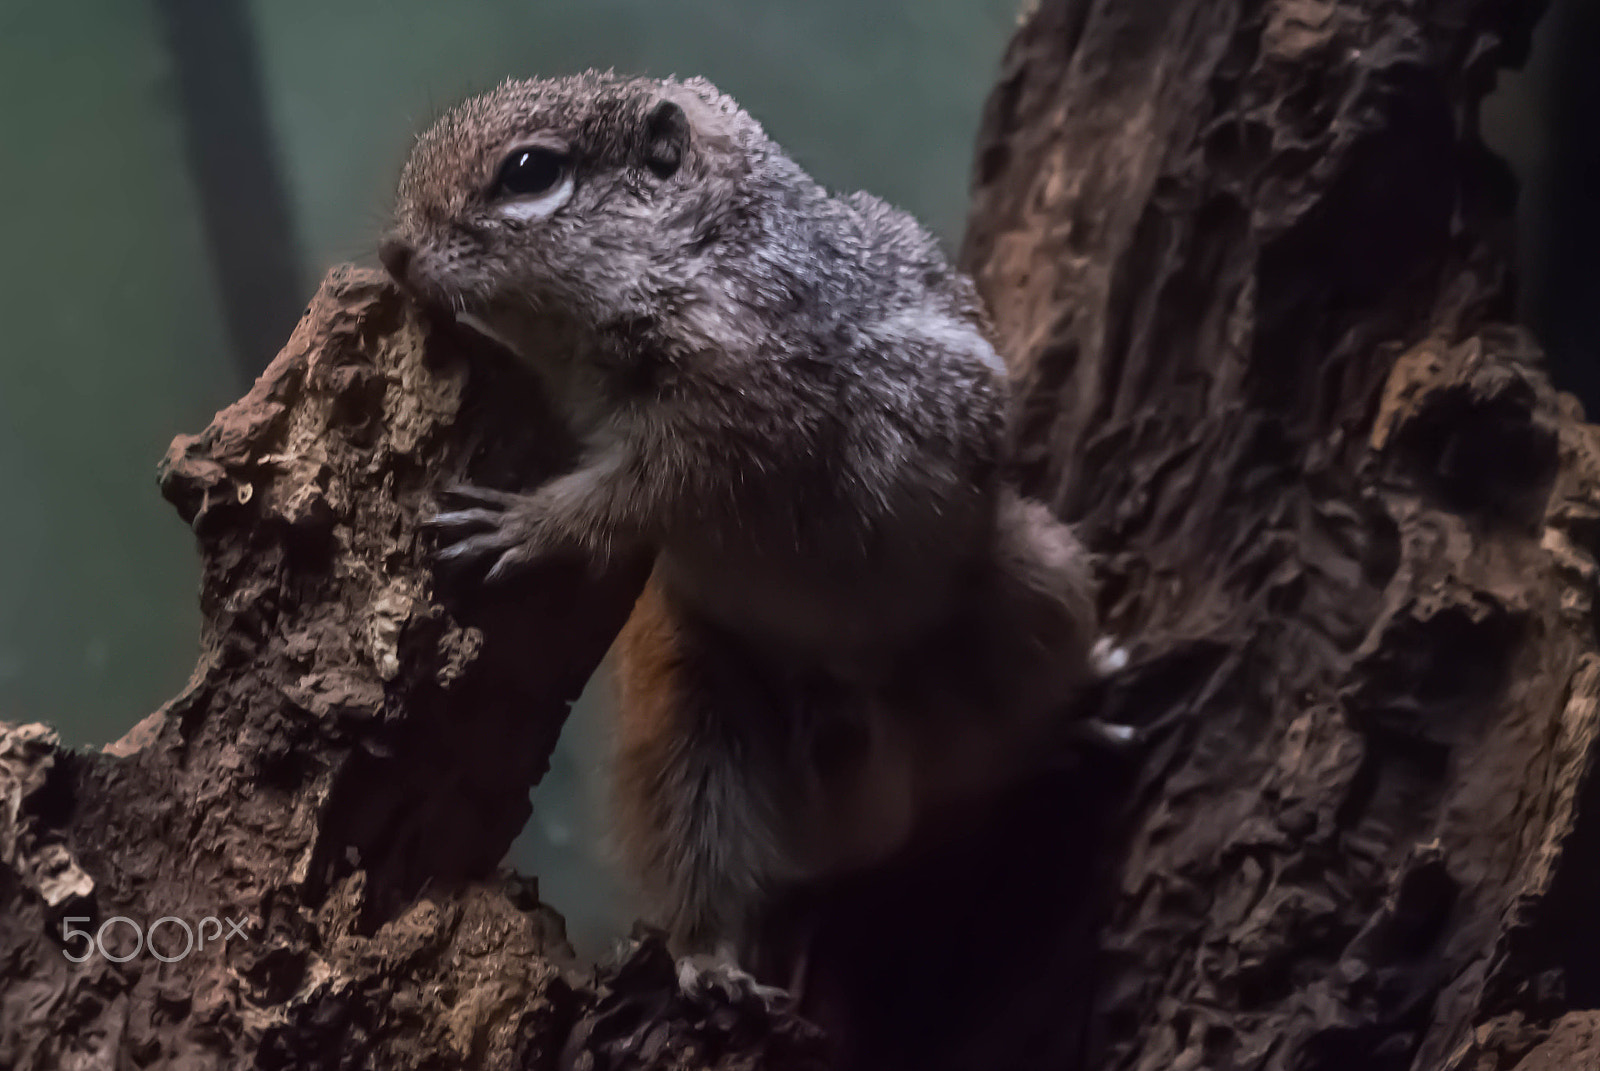 Sony a99 II sample photo. "harris's antelope squirrel" lives in rainforests photography